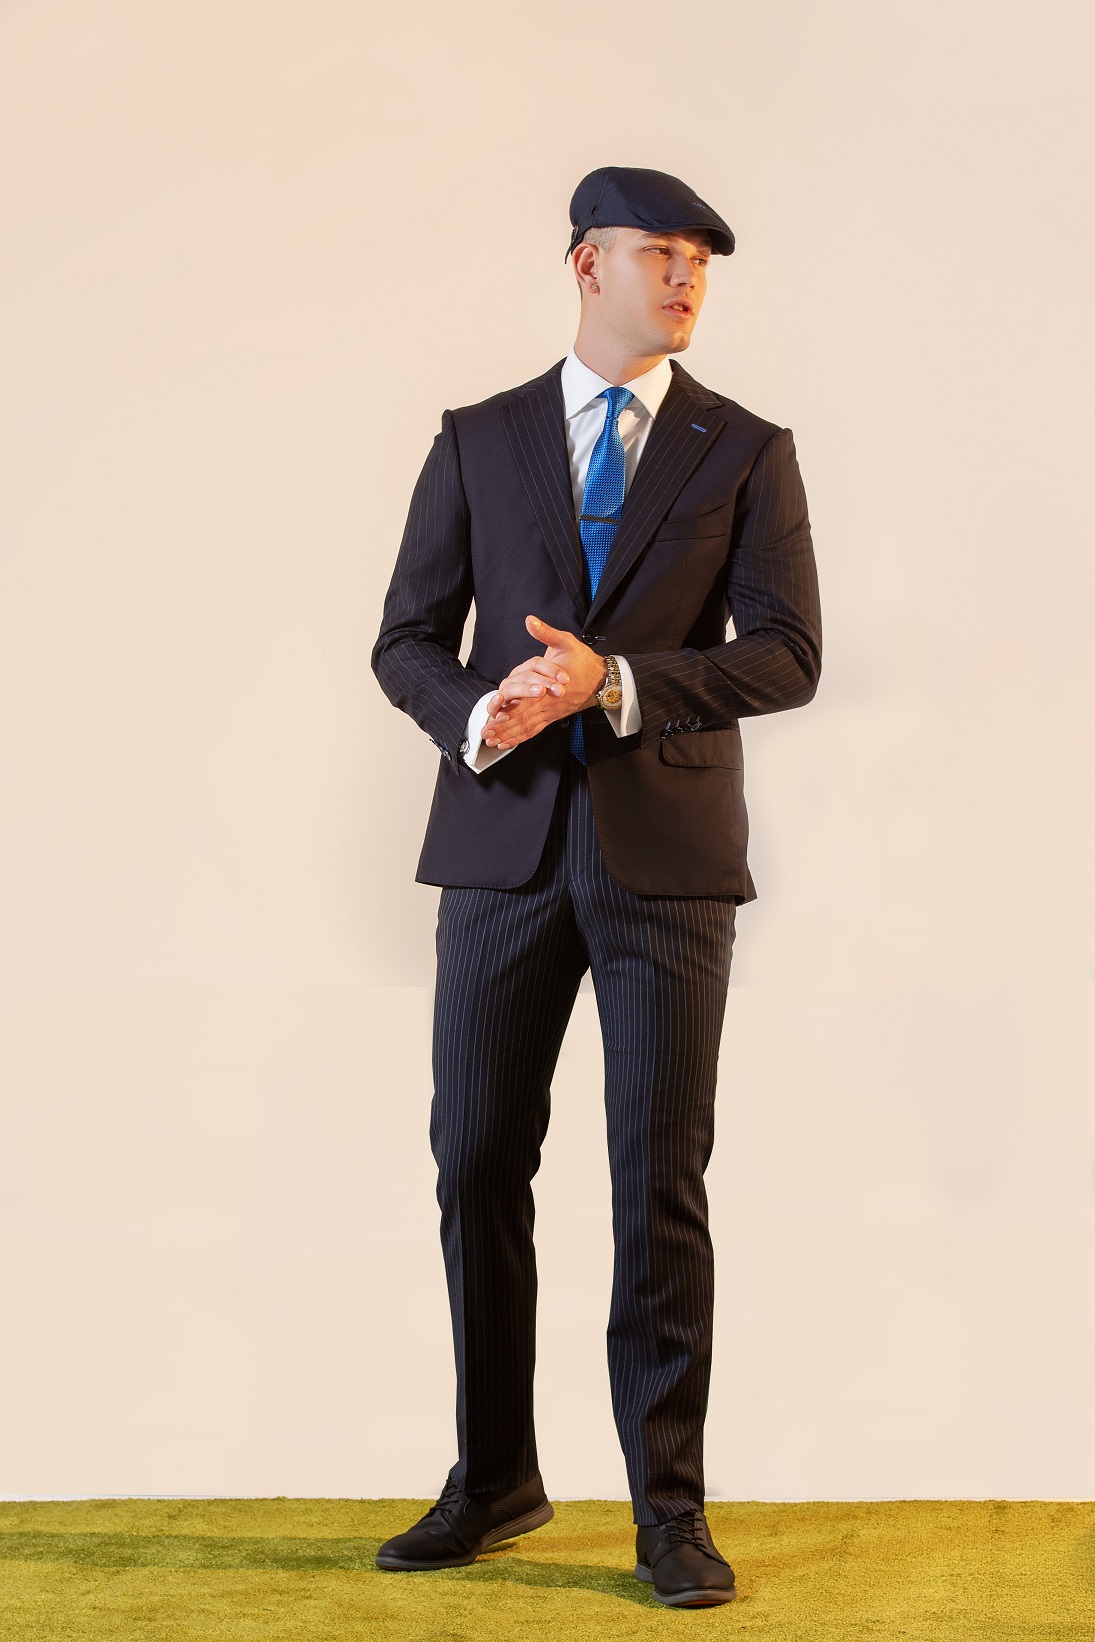 tailored suits in Dubai by Lapels Bespoke